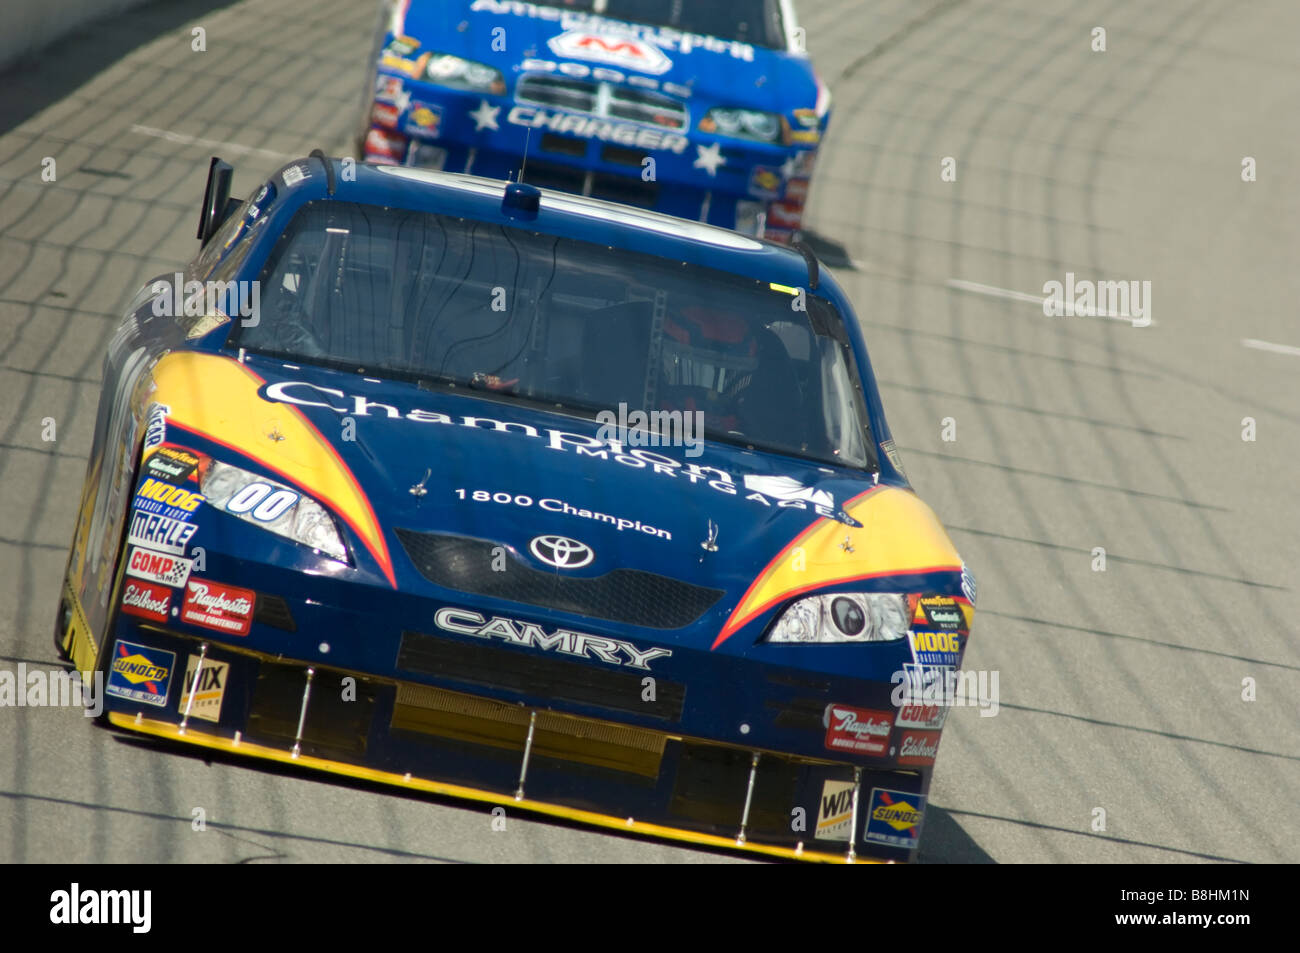 Michael McDowell races the Champion Mortgage Toyota Camry at the LifeLock 400 race at Michigan International Speedway, 2008. Stock Photo